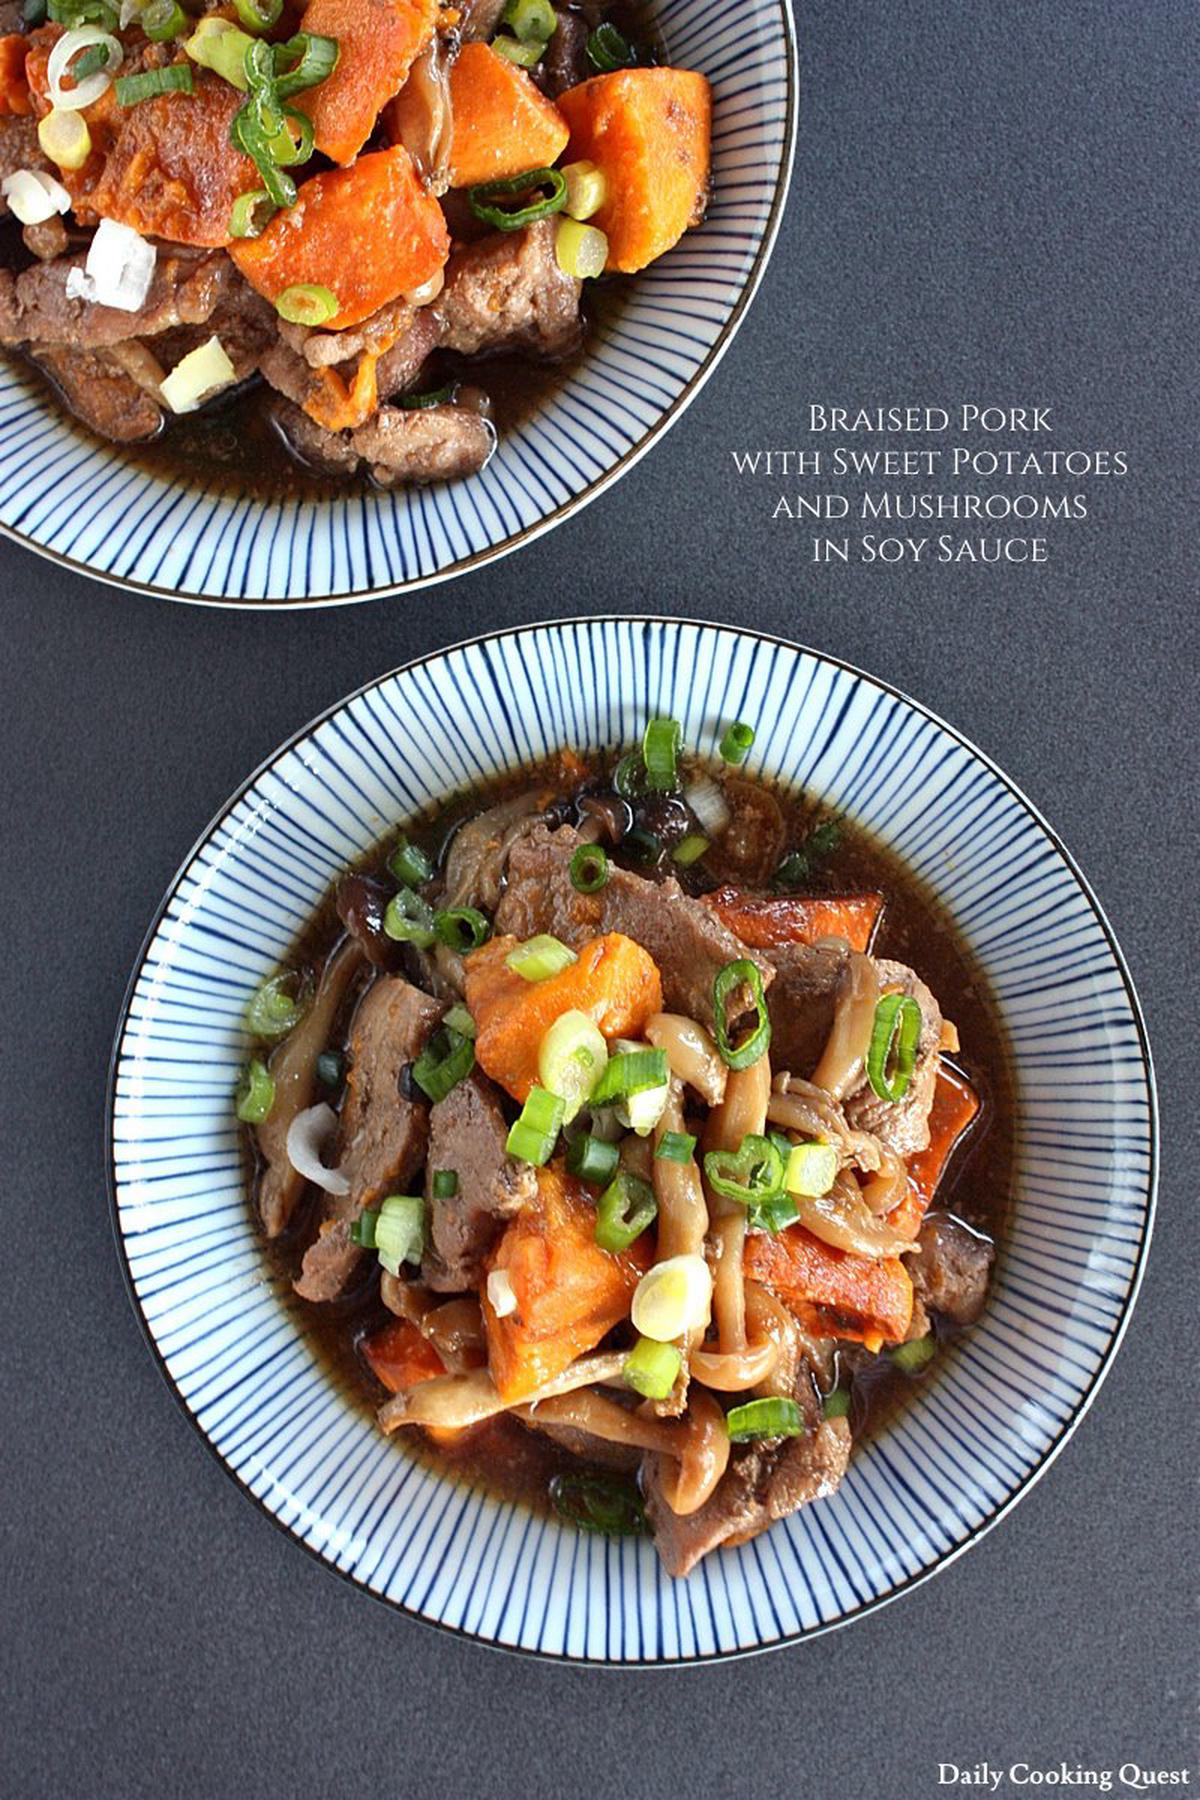 Braised Pork with Sweet Potatoes and Mushrooms in Soy Sauce